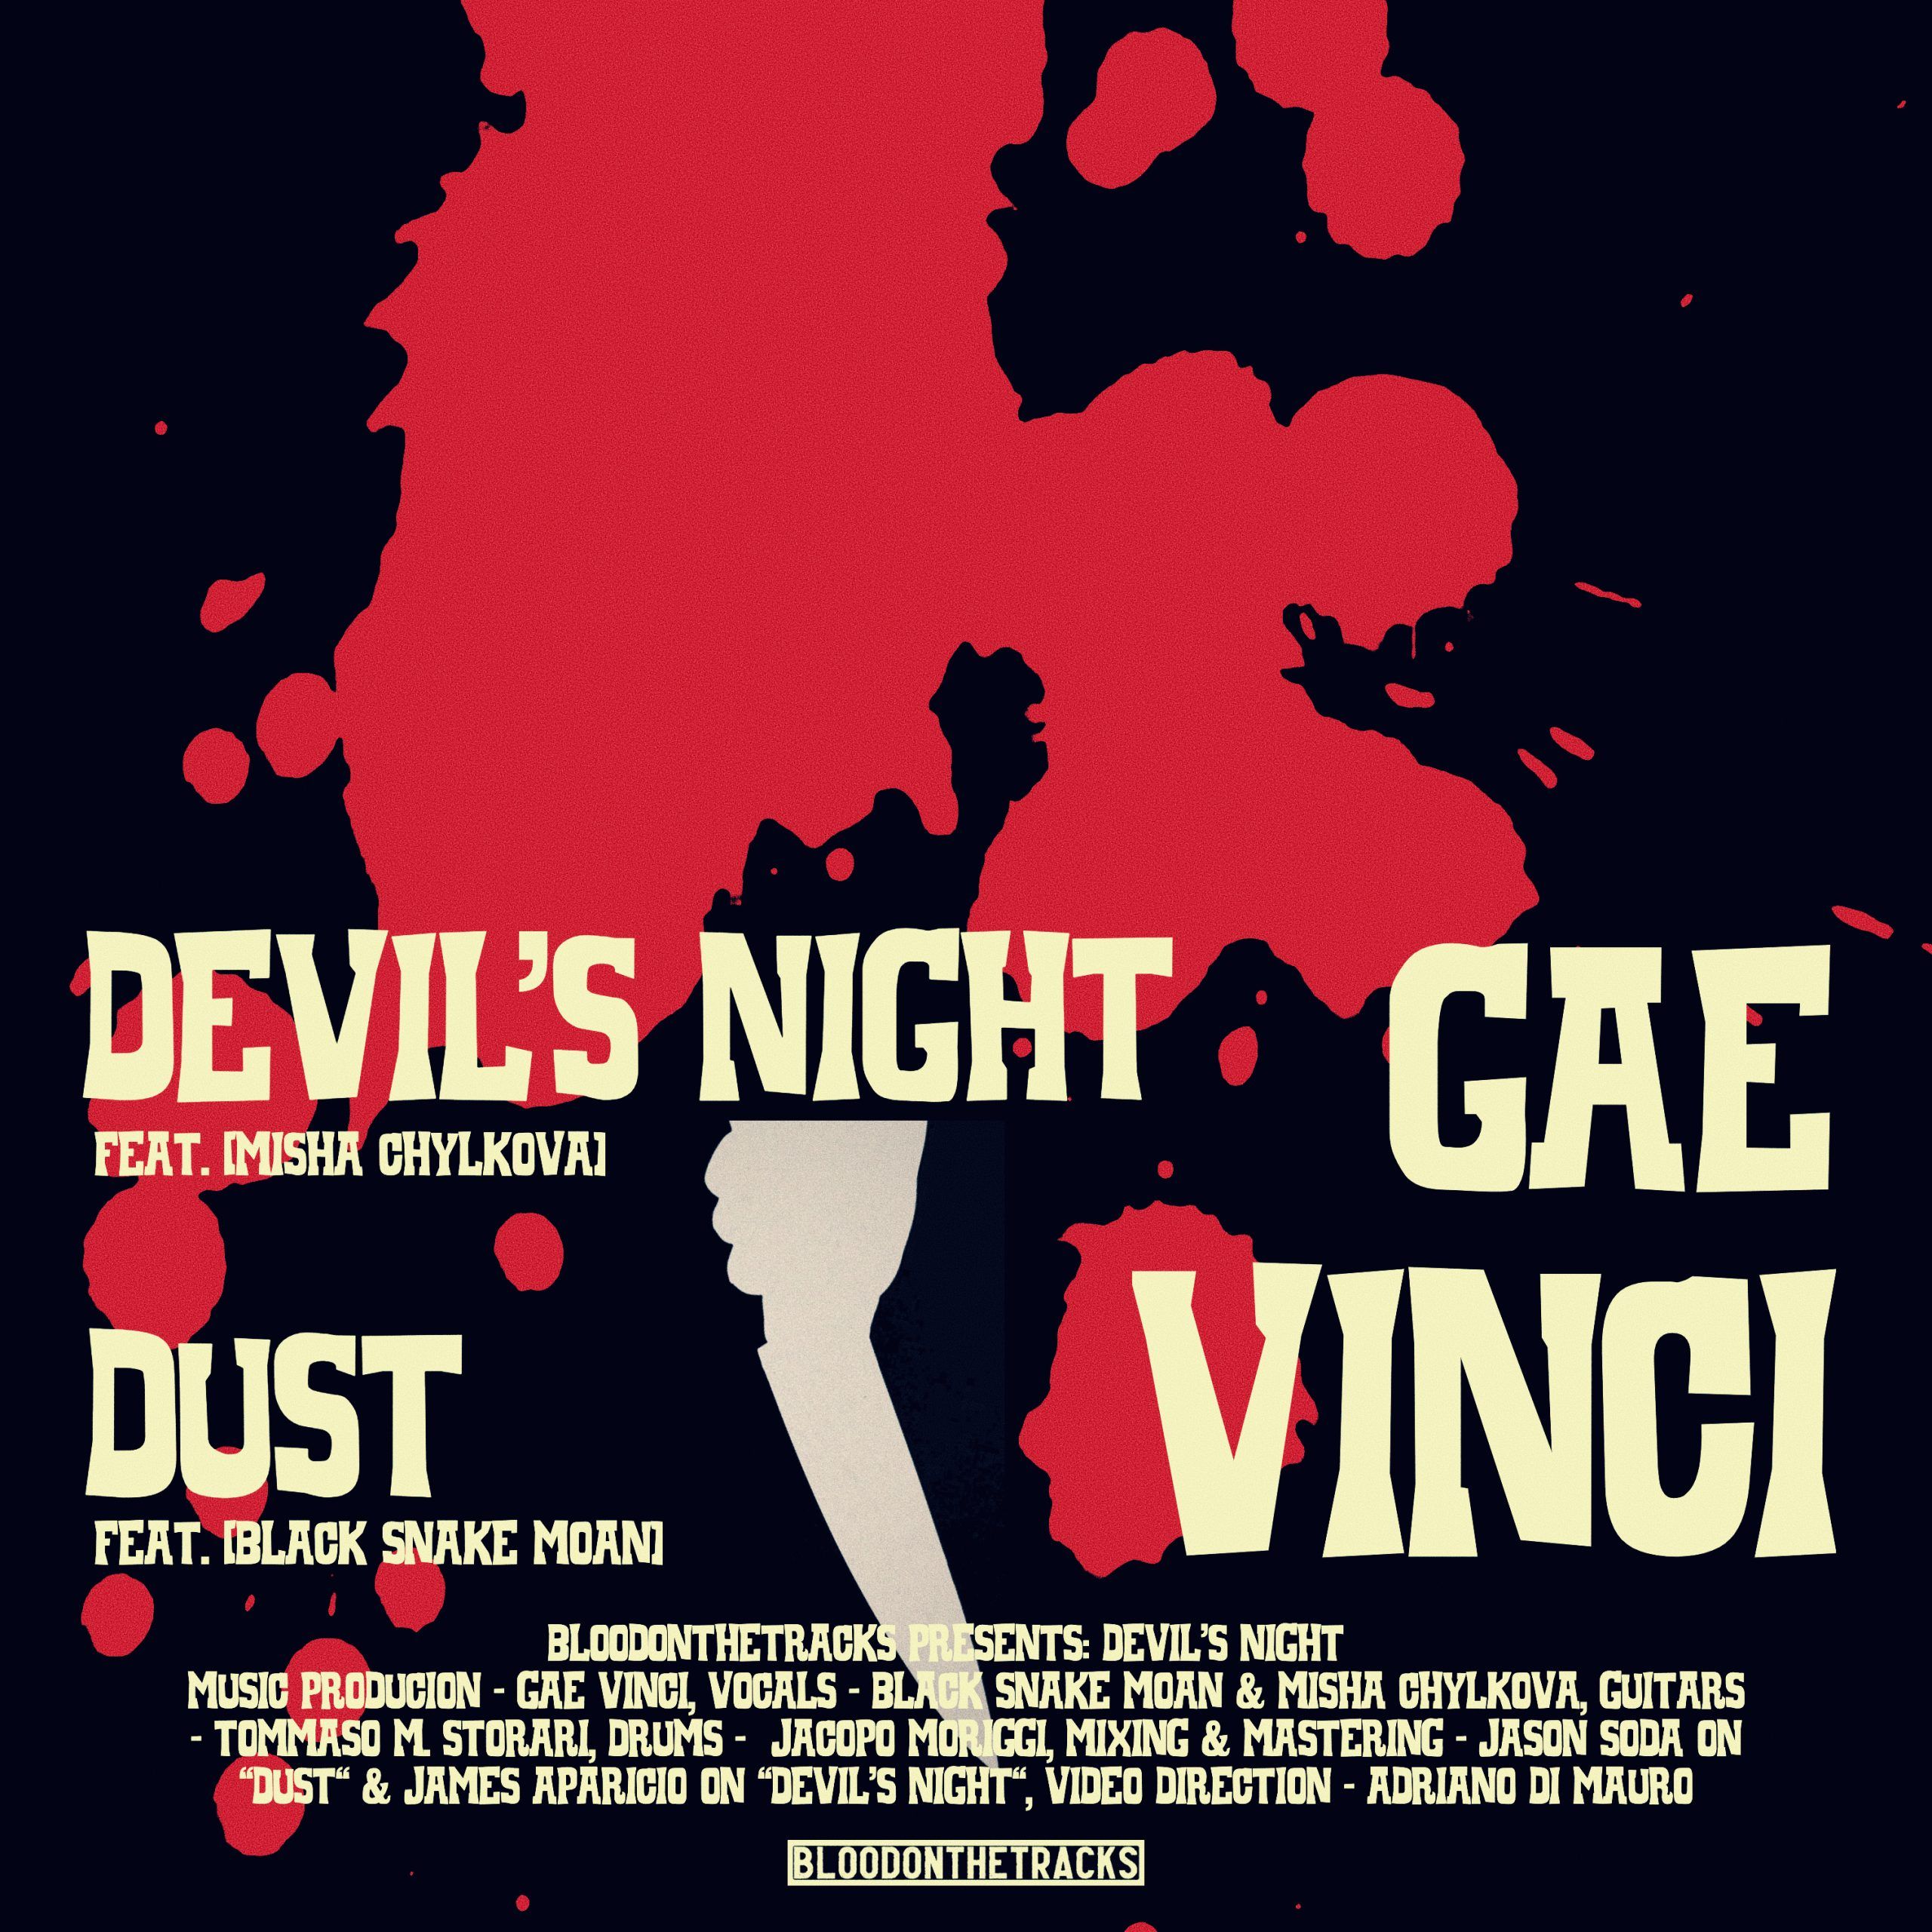 Gae Vinci Pays Tribute to Mid-70s Italian Horror in the Video for “Devil’s Night” Featuring Misha Chylkova